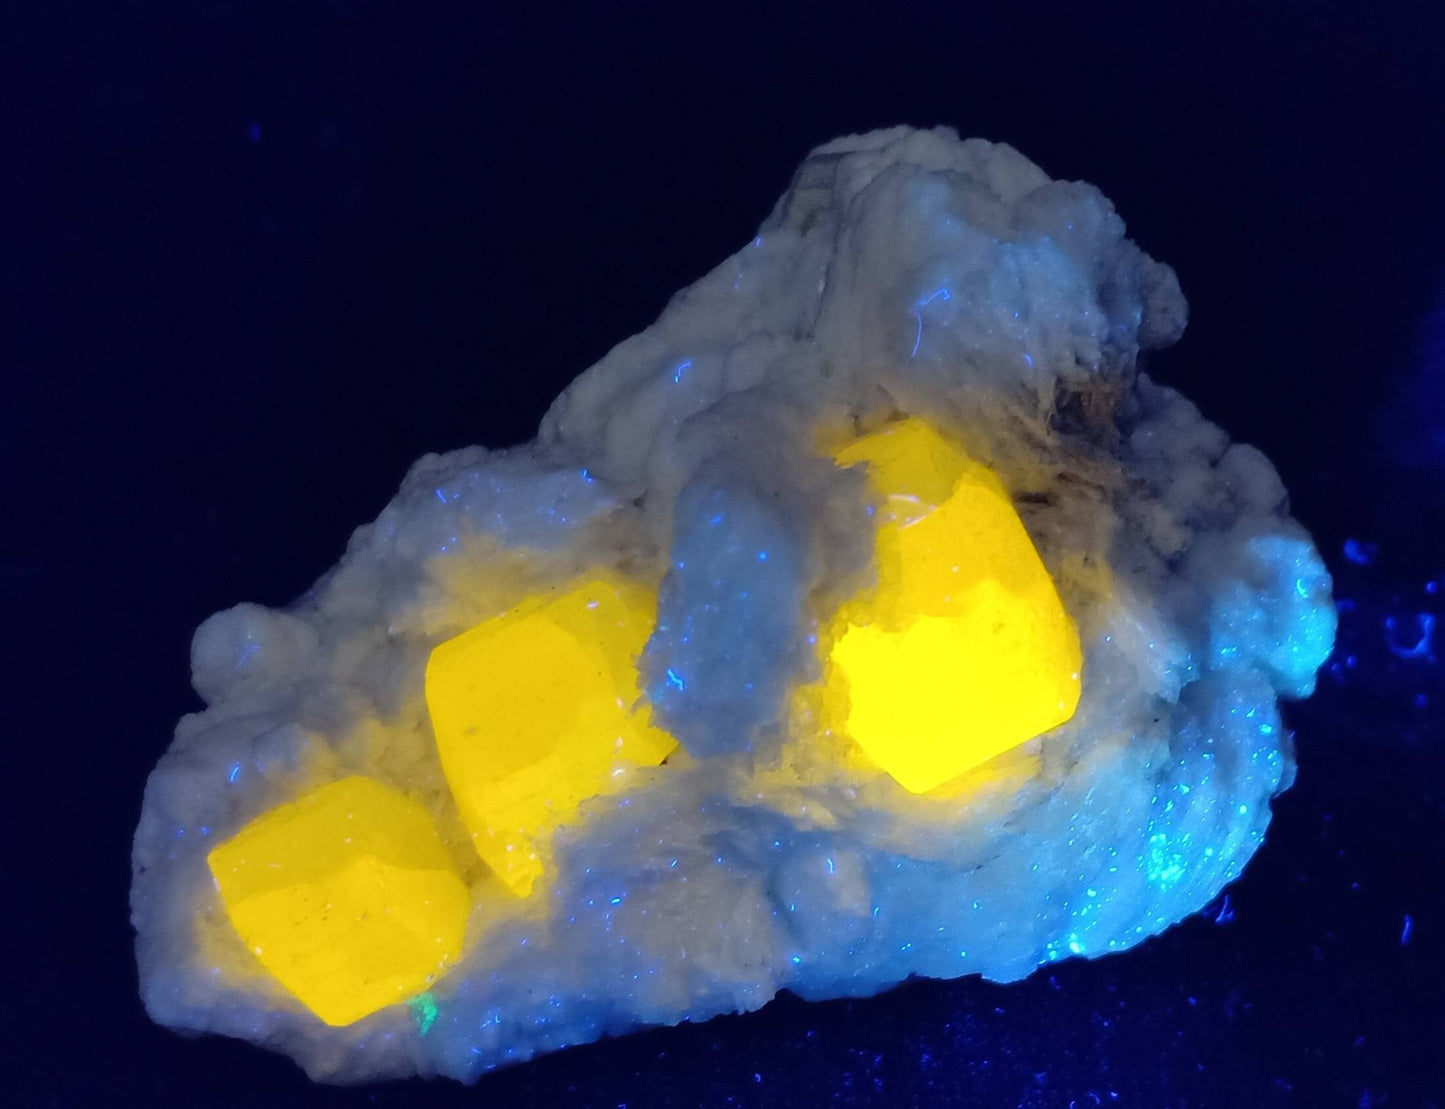 An amazing specimen of Fluorescent Apatite on matrix with mica 208 grams